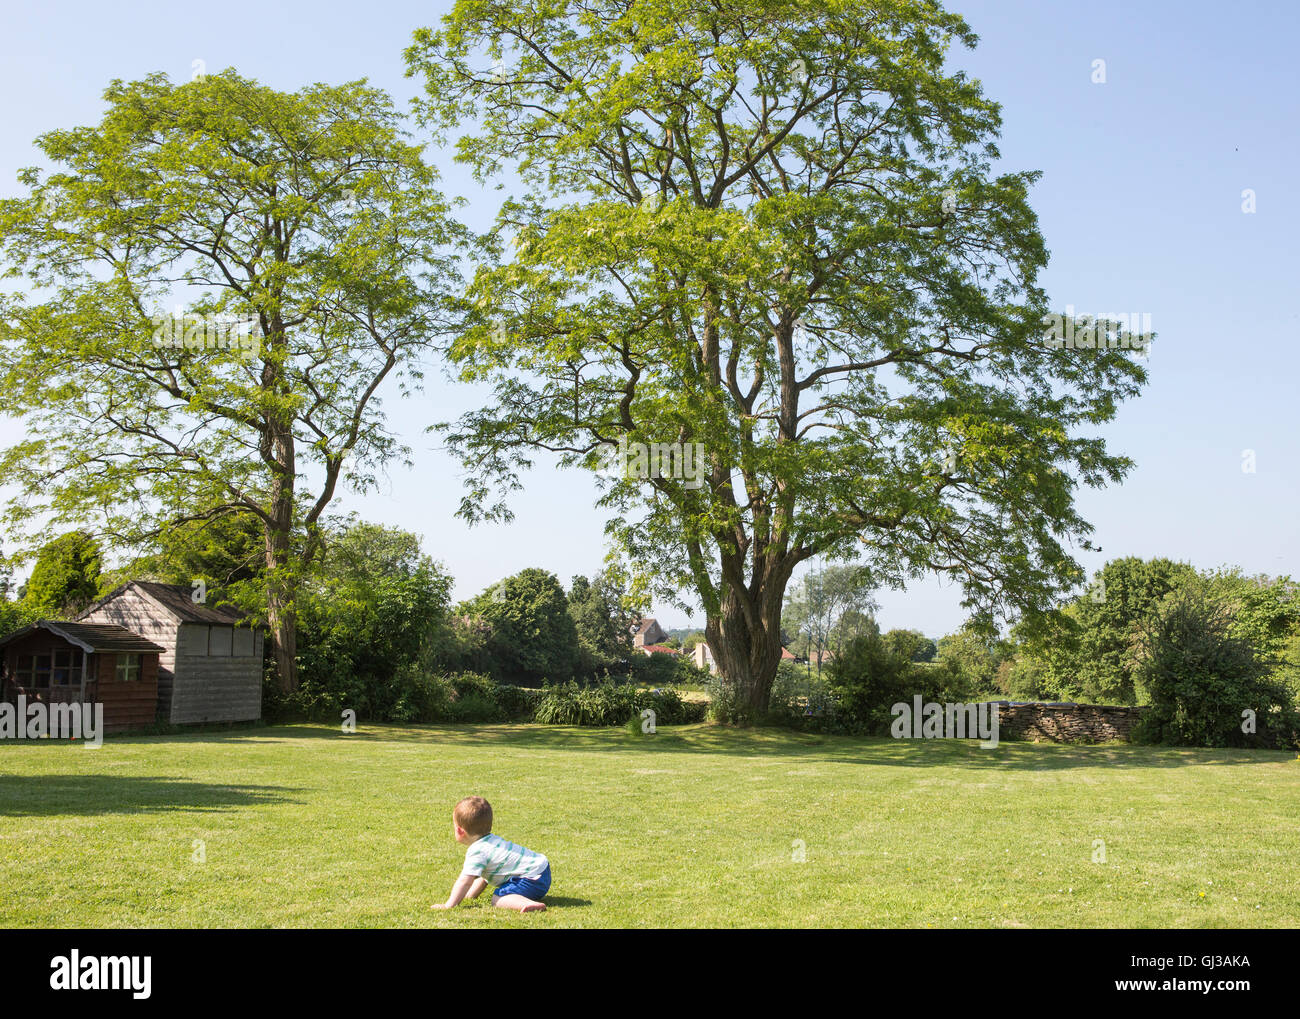 Baby Boy crawling on grass in garden Banque D'Images